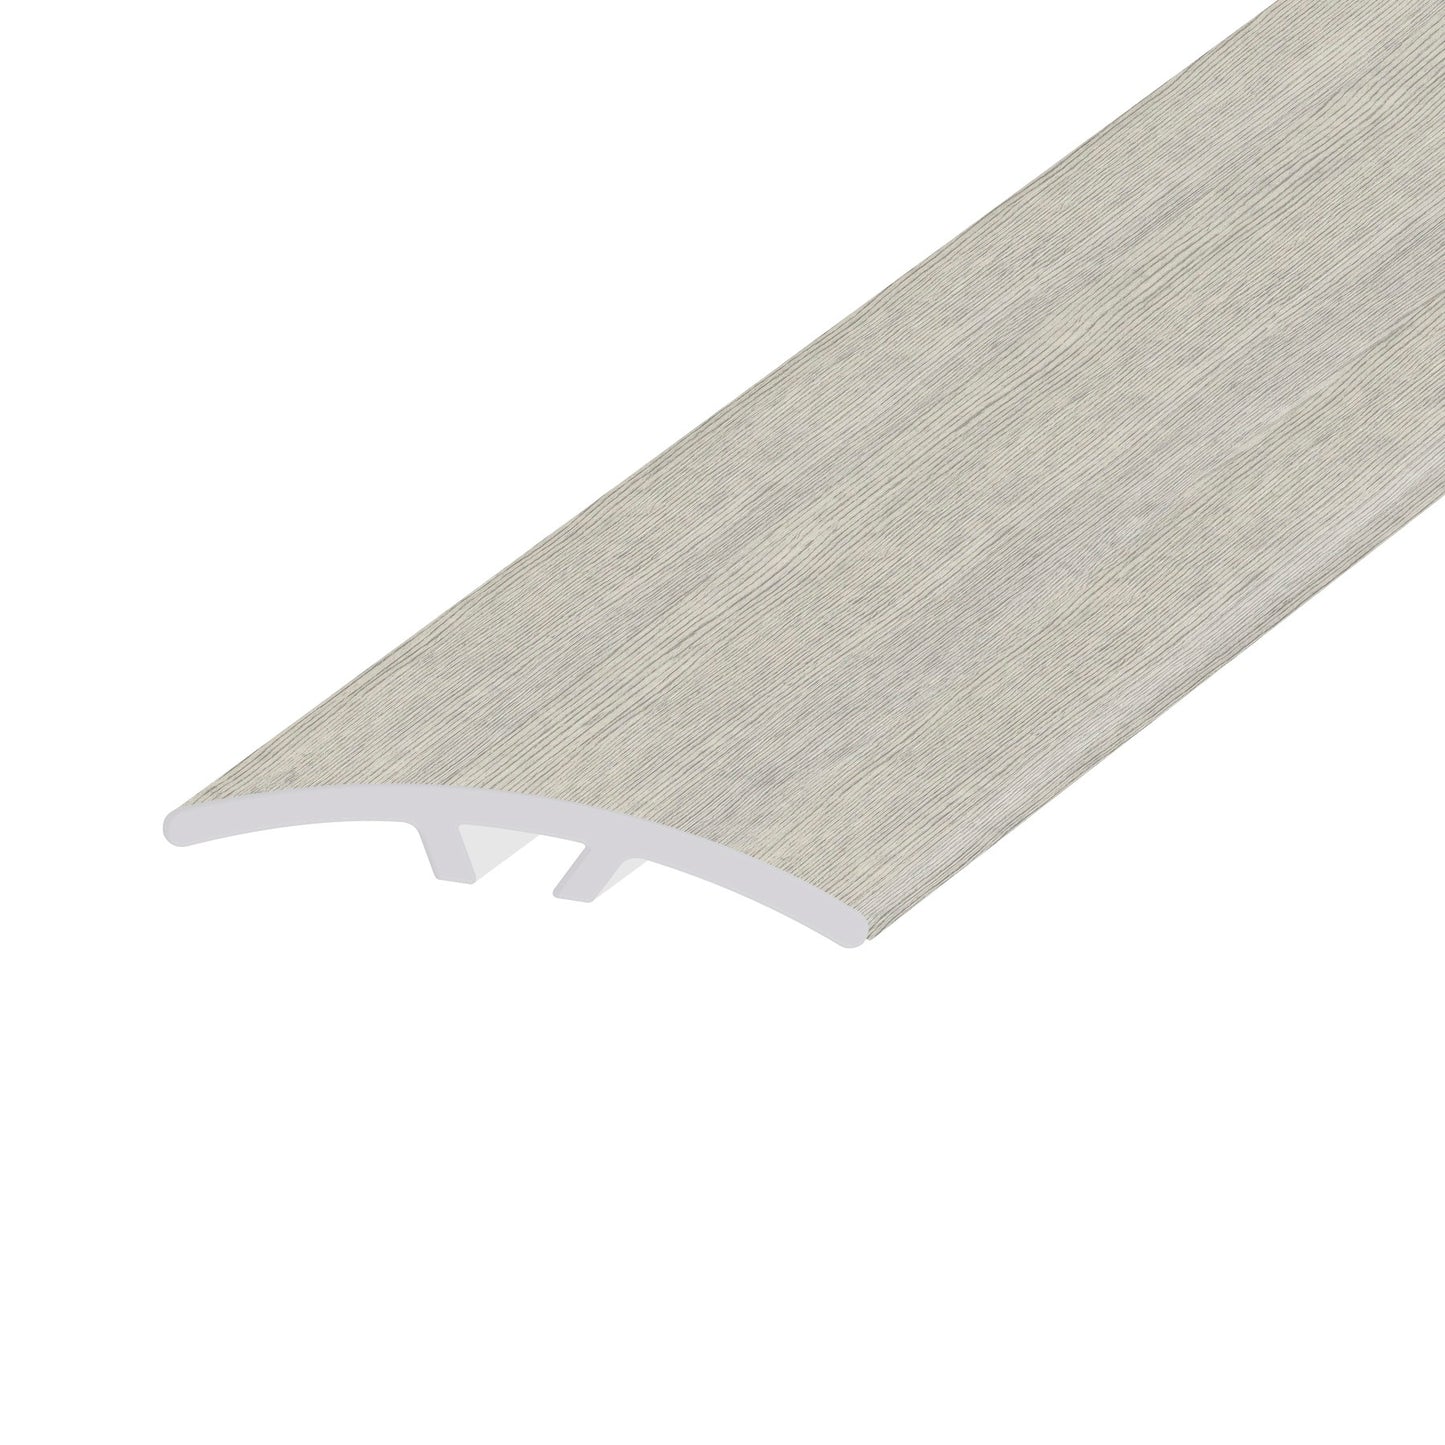 Morning Frost 0.23 in. Thick x 1.59 in. Width x 94 in. Length Multi-Purpose Reducer Vinyl Molding